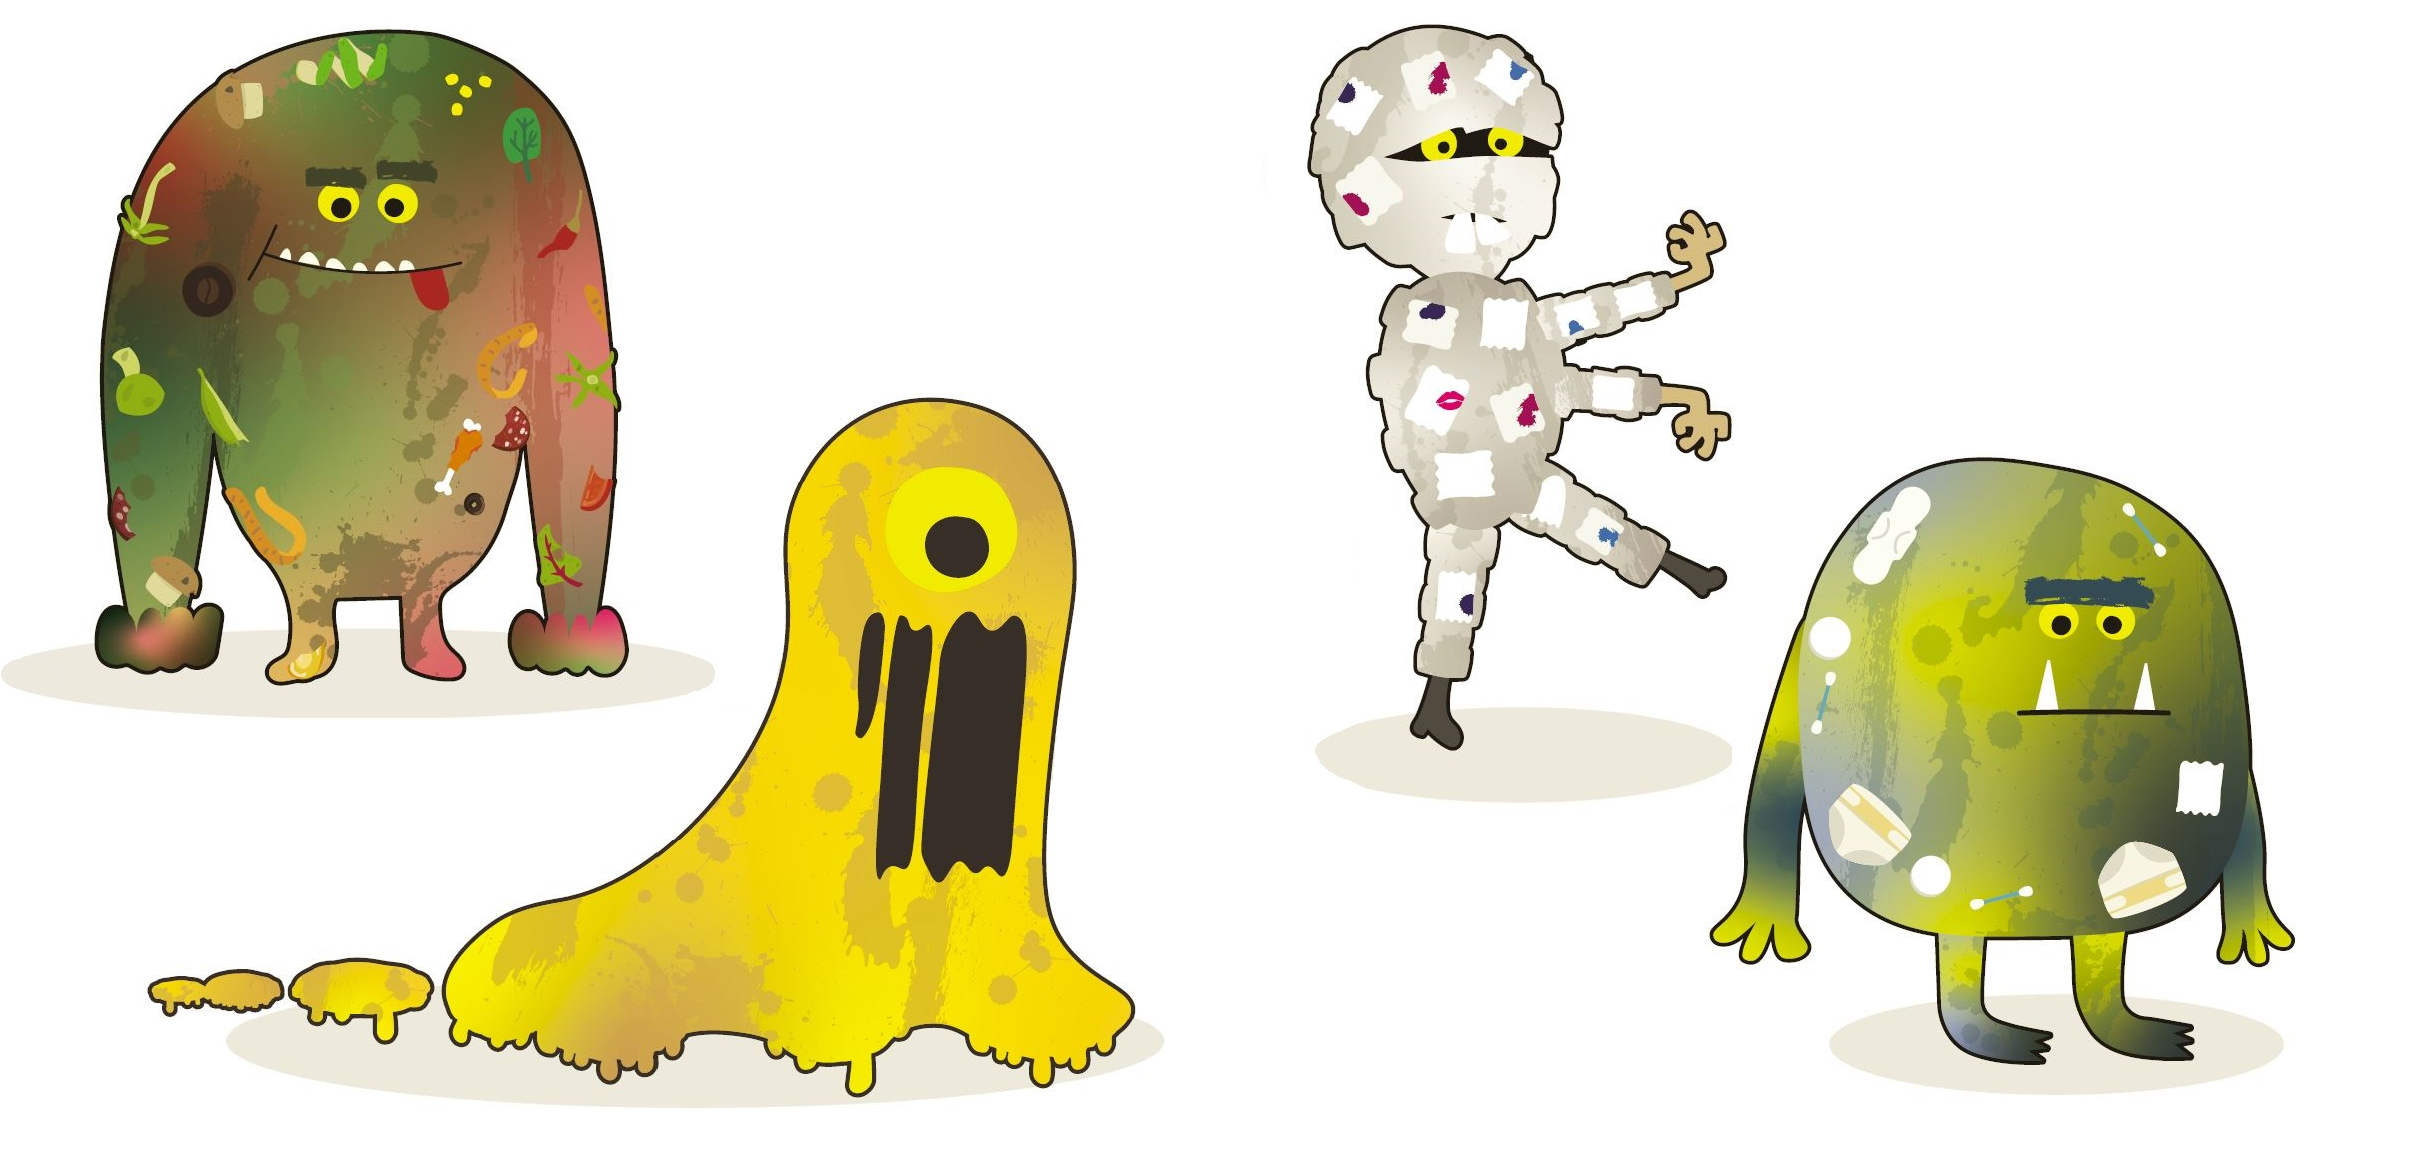 Banner image of sewer monsters